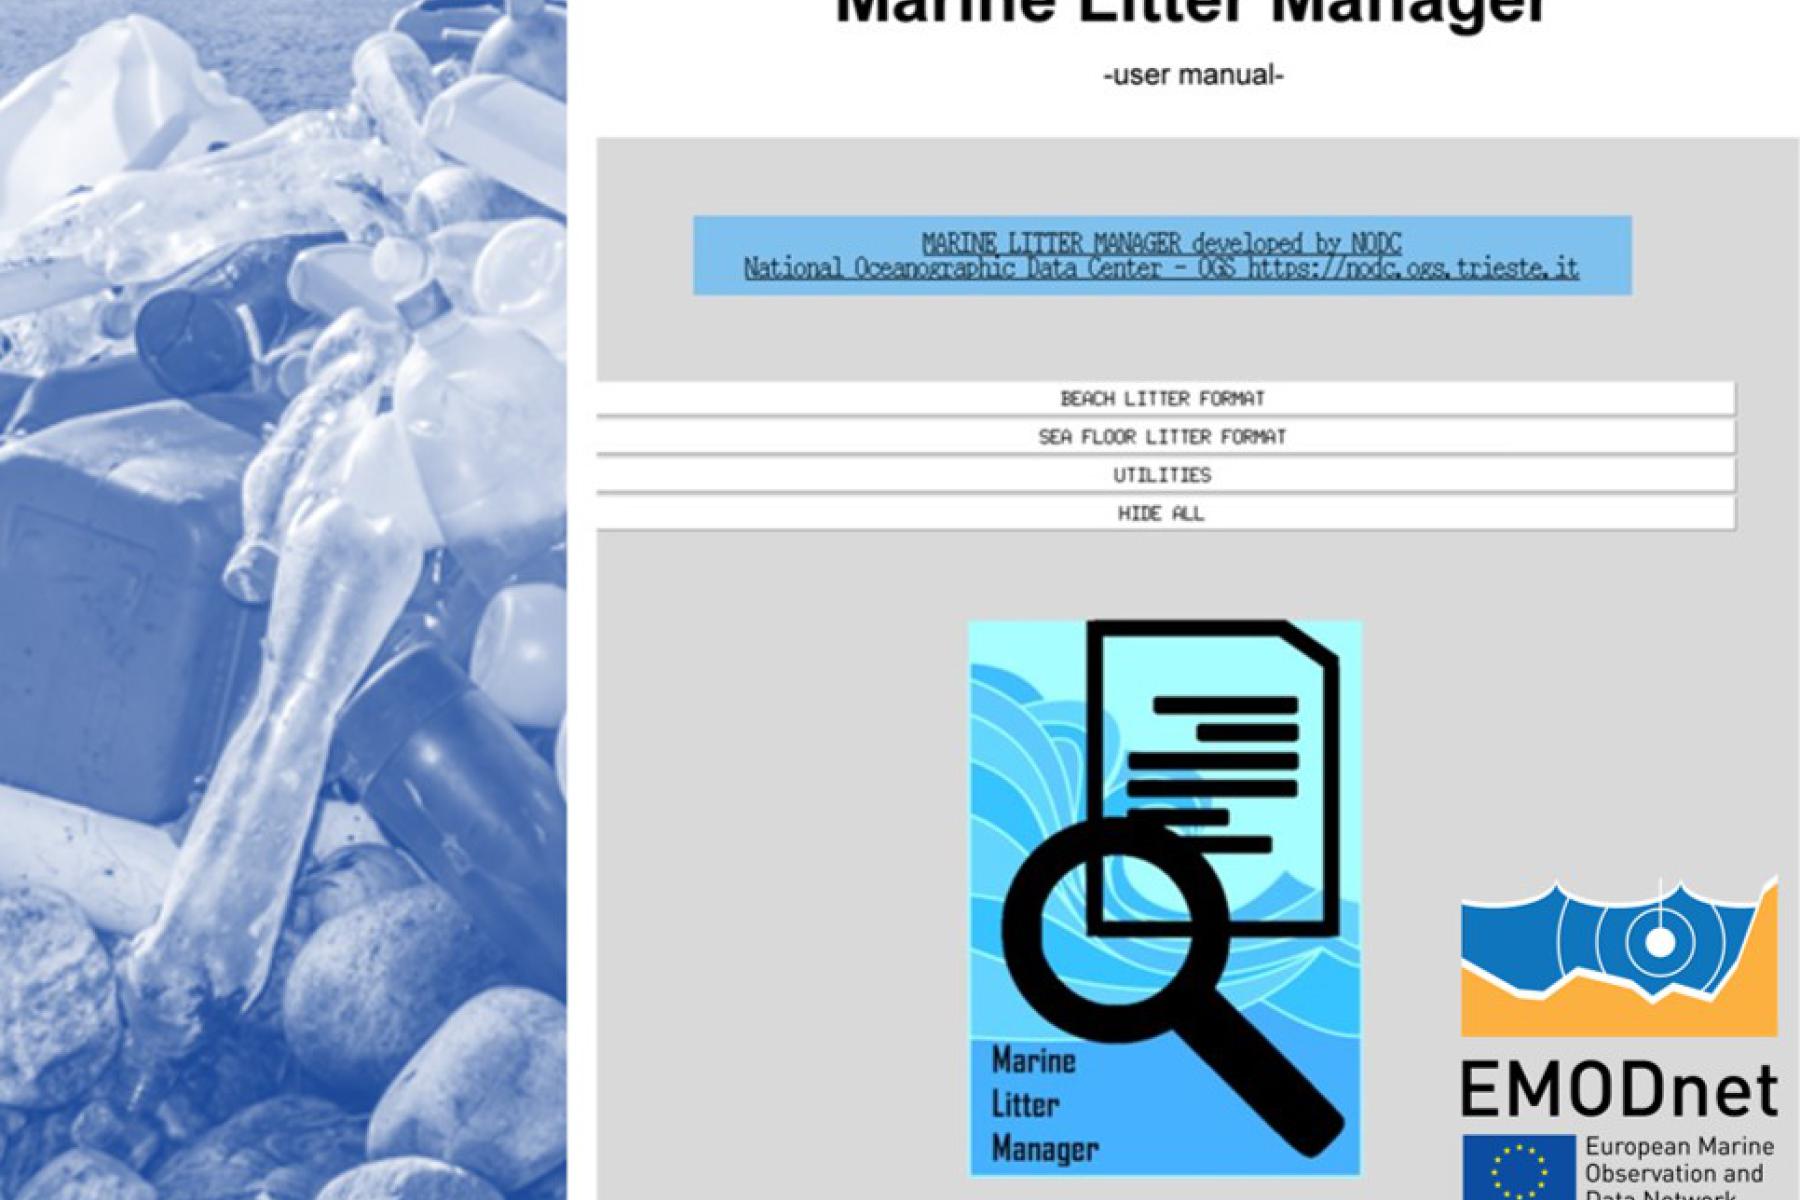 Manual for the Marine Litter Manager tool. ©EMODnet